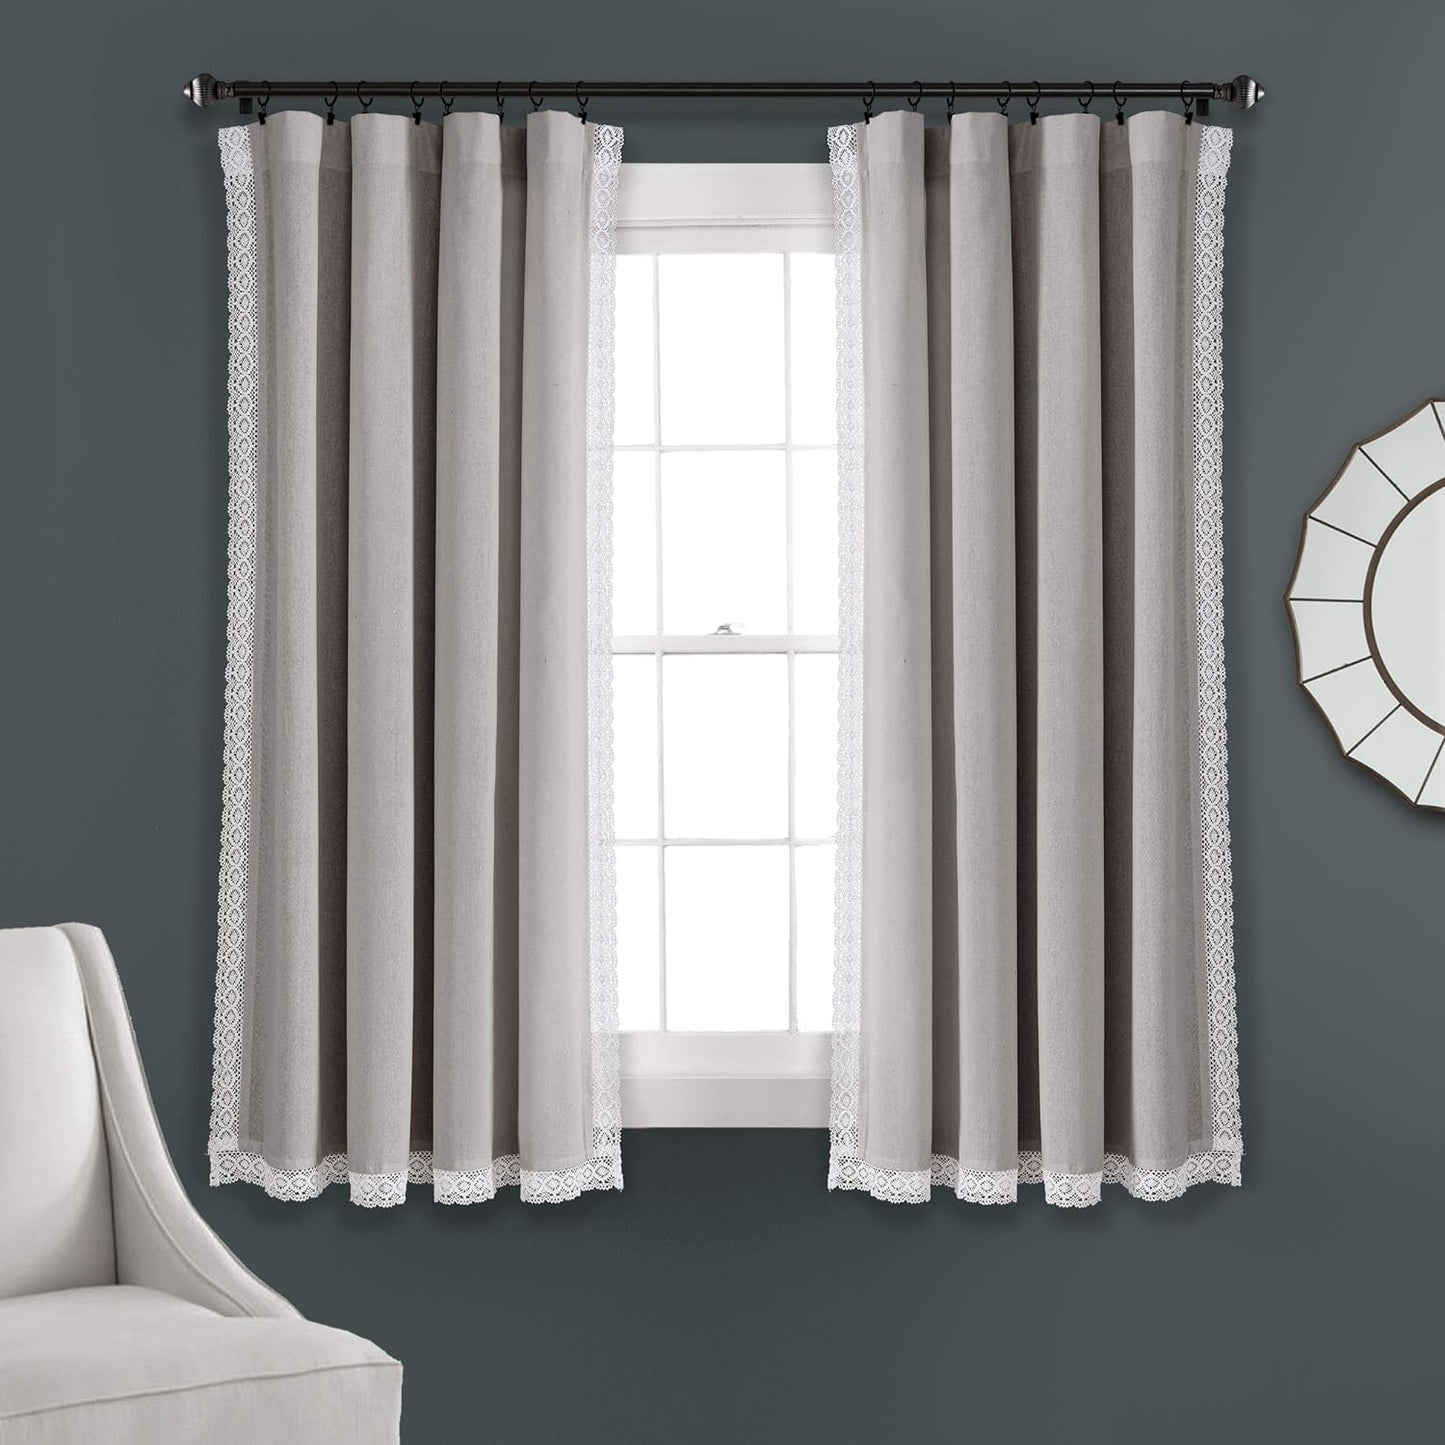 Lush Decor Rosalie Light Filtering Window Curtain Panel Set- Pair- Vintage Farmhouse & French Country Style Curtains - Timeless Dreamy Drape - Romantic Lace Trim - 54" W X 84" L, White  Triangle Home Fashions Light Gray Window Panel 54"W X 63"L